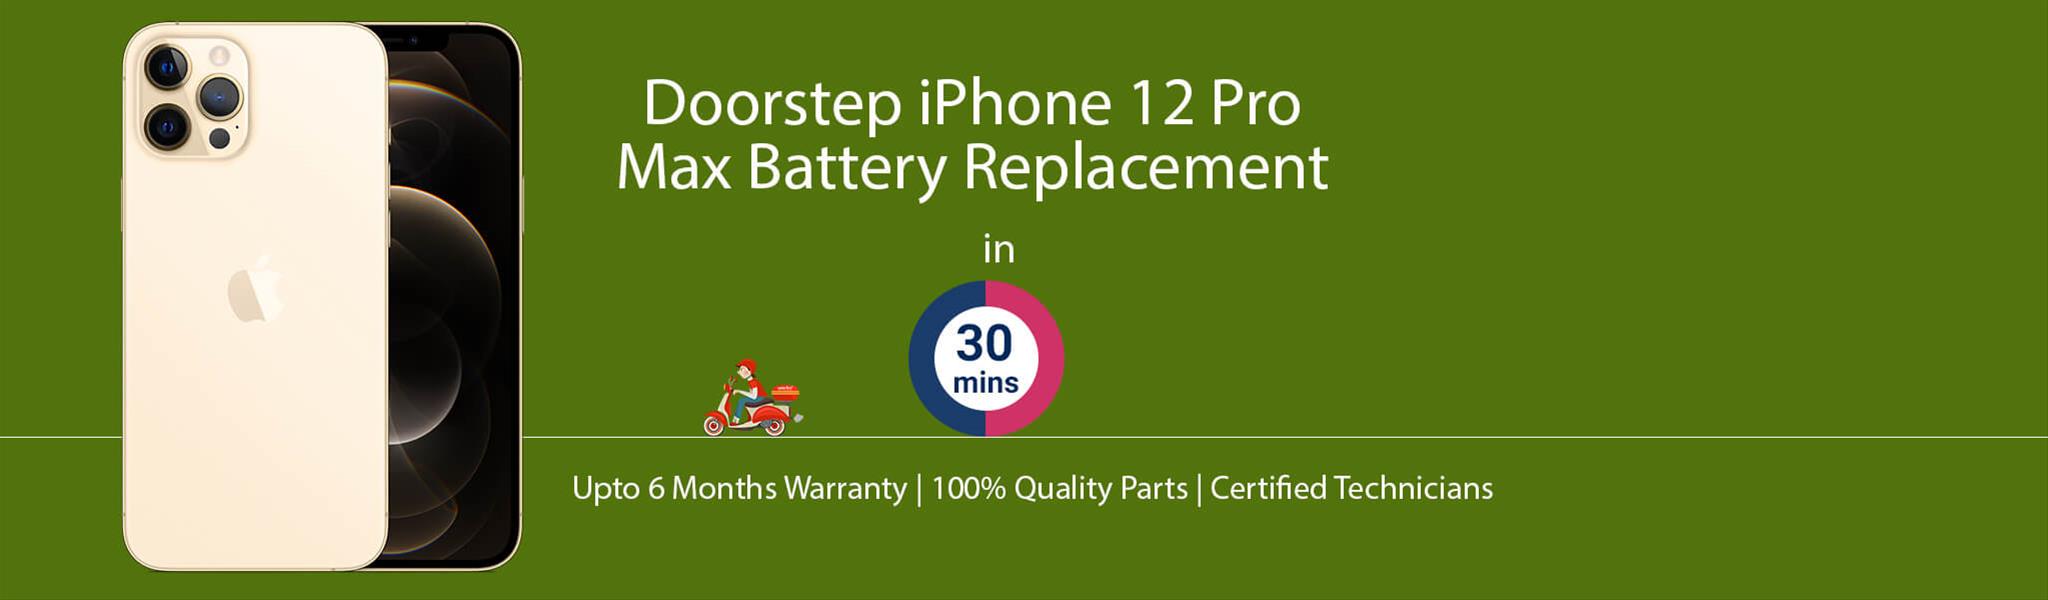 iphone-12-pro-max-battery-replacement.jpg